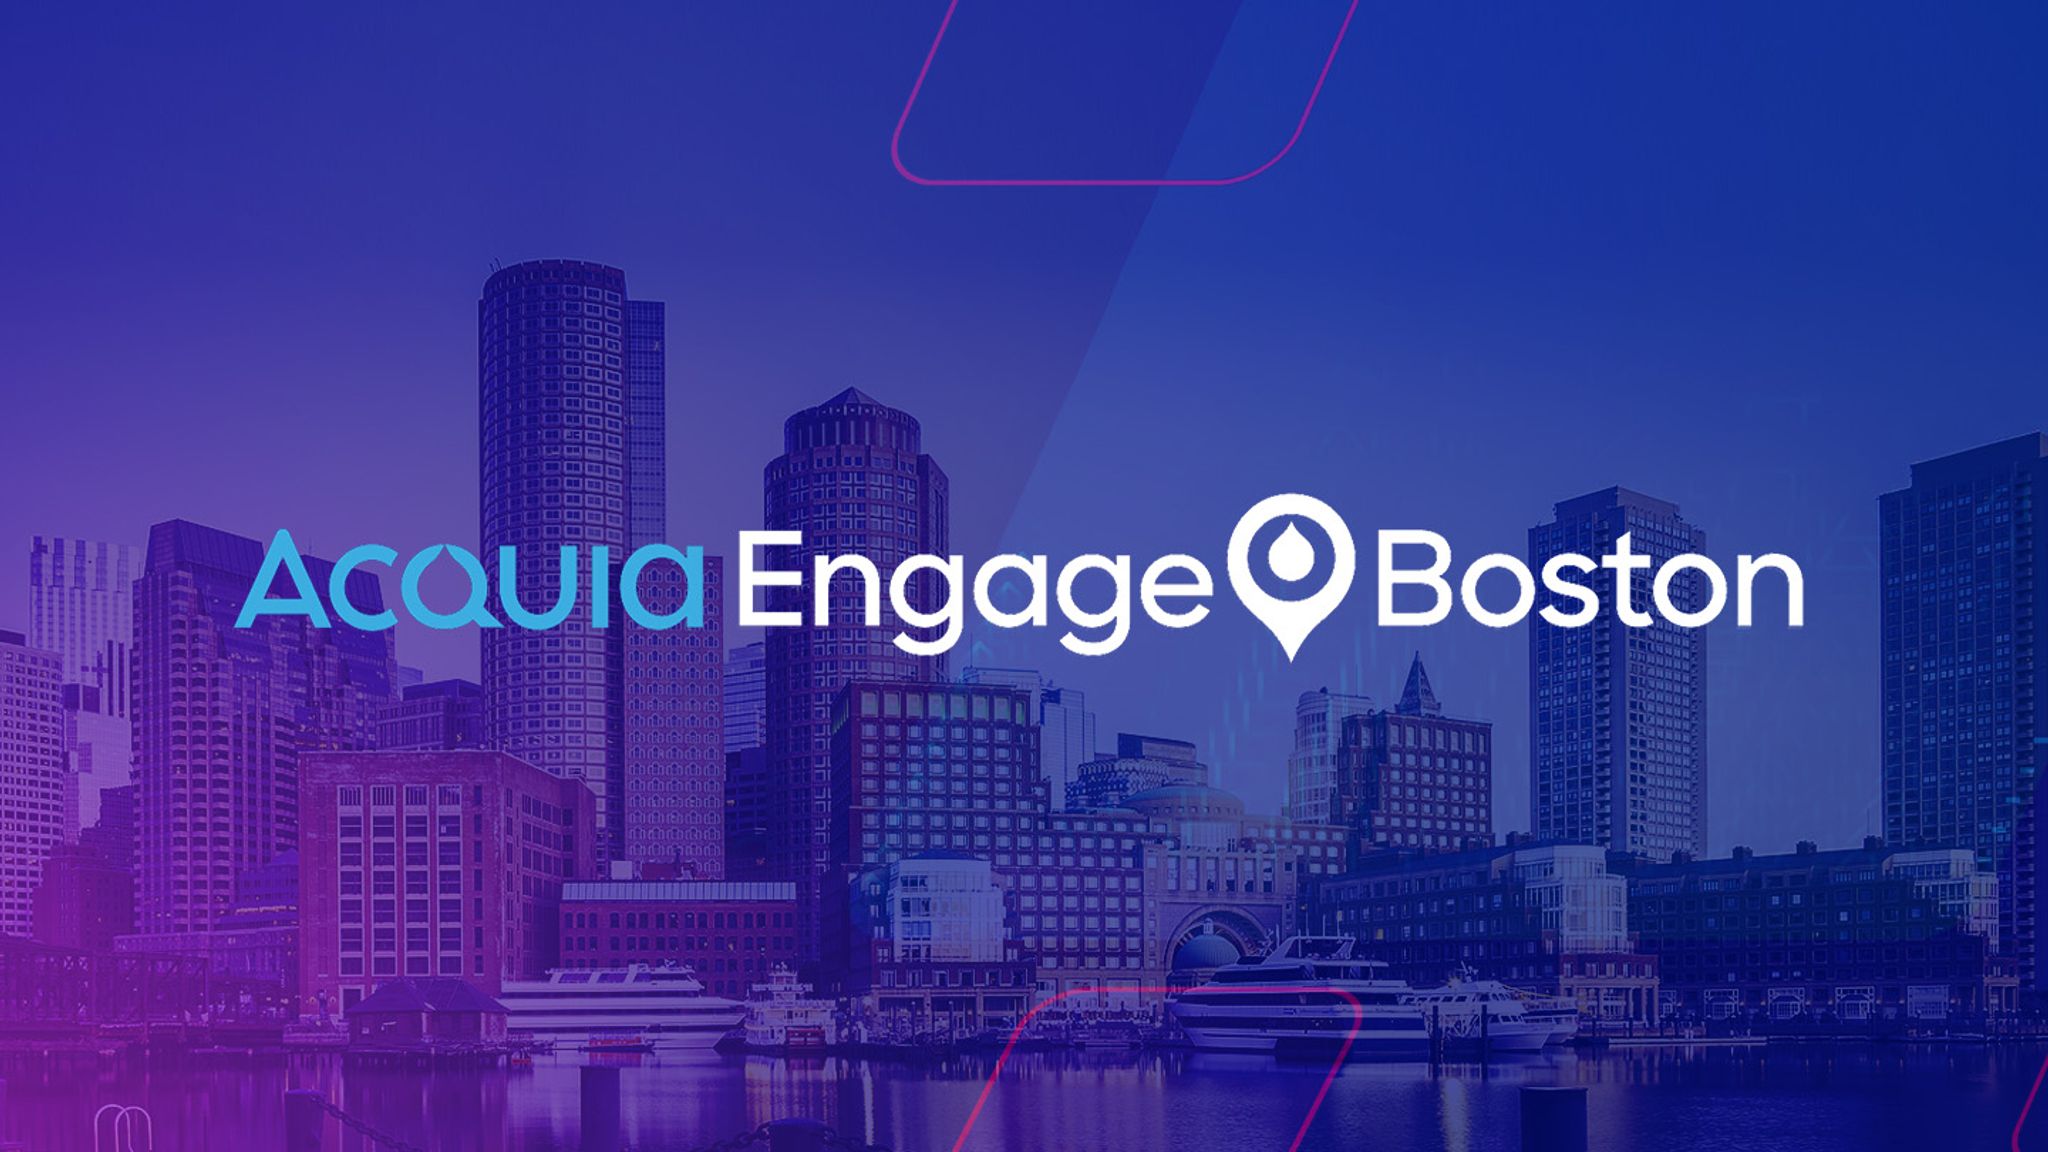 Acquia Engage Boston logo over an image of downtown Boston near the harbor, with a dark purple overlay